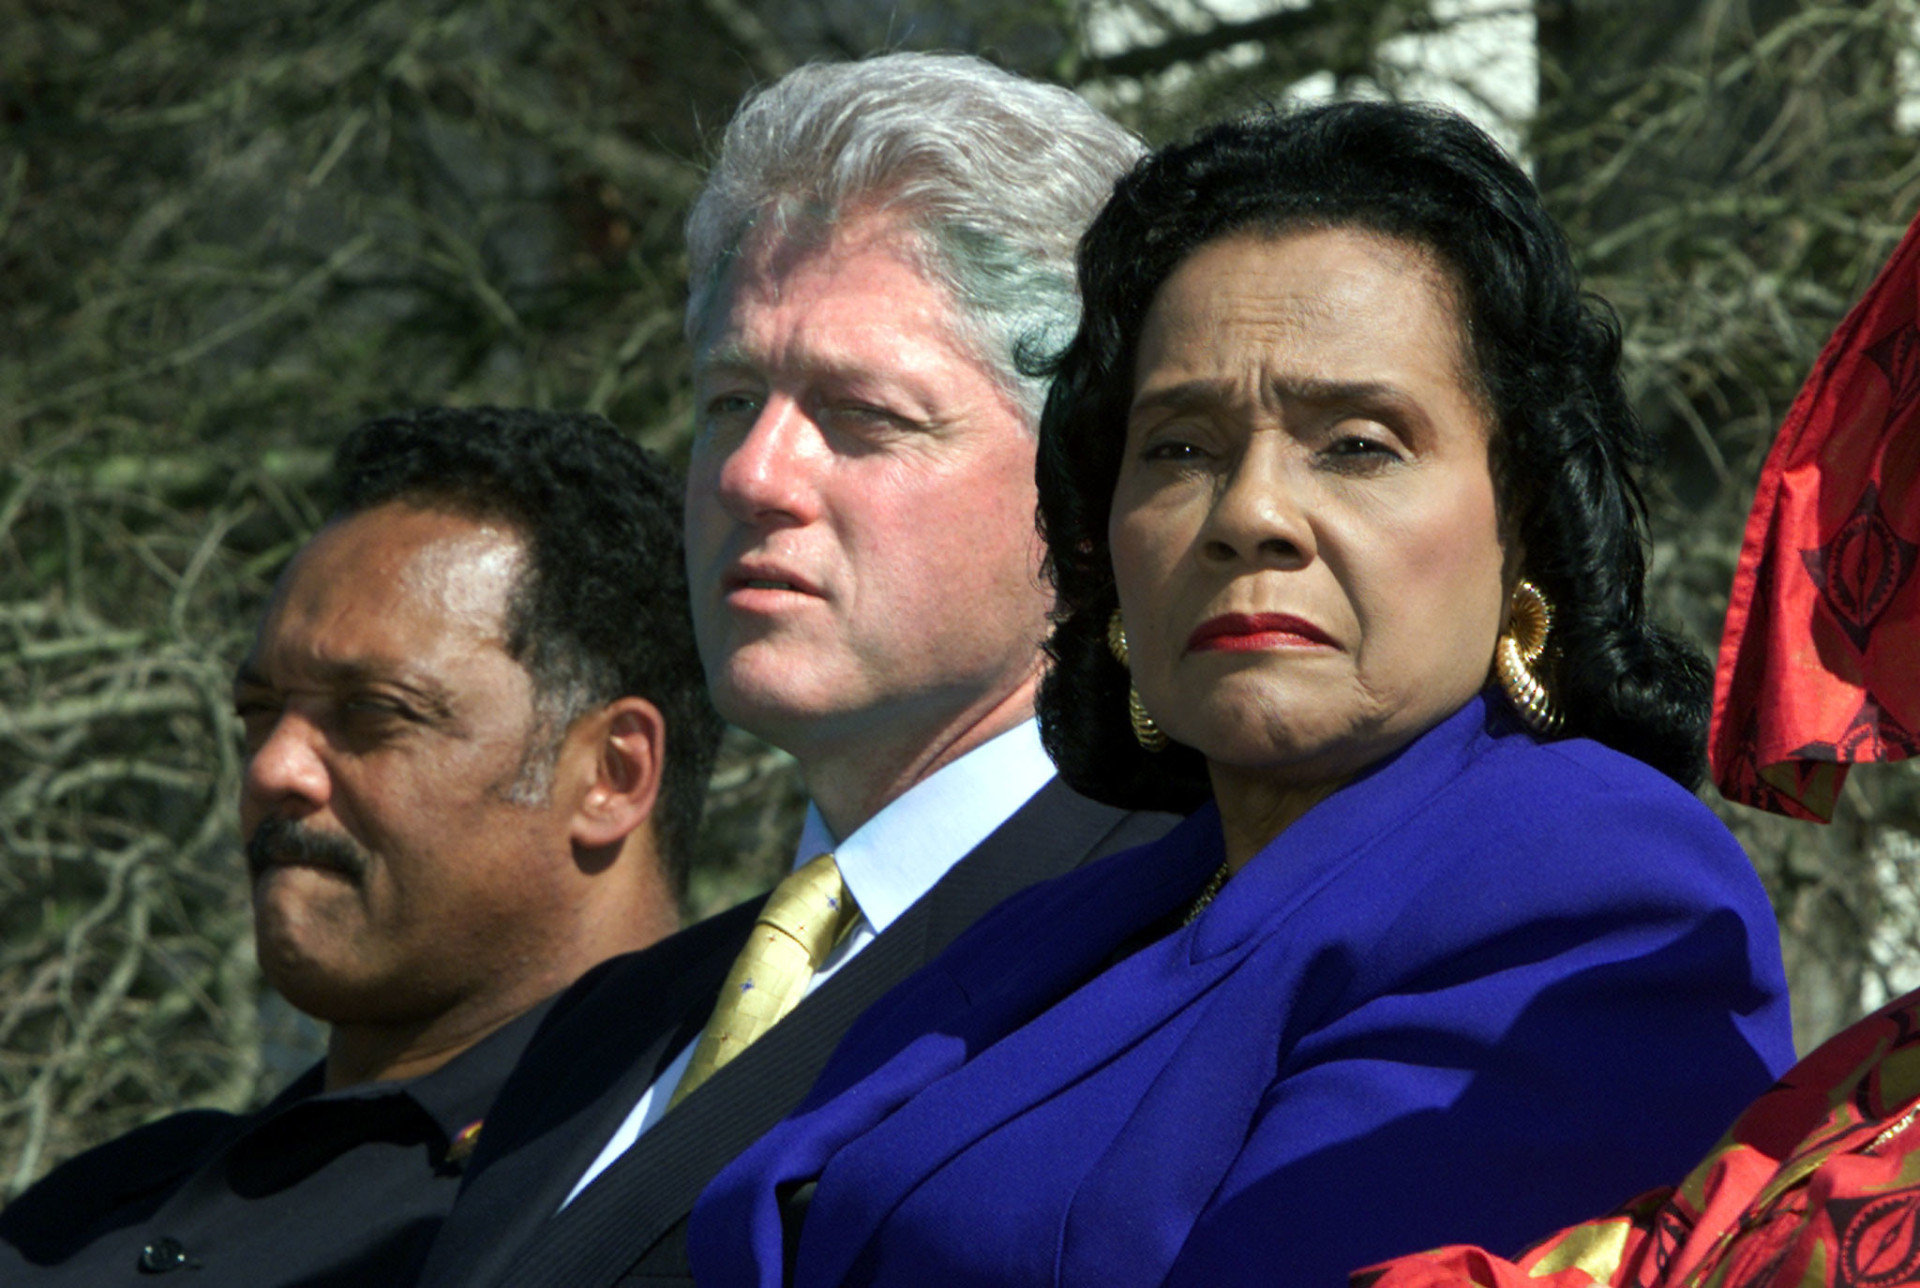 President Bill Clinton, Rev. Jesse Jackson, and Coretta Scott King, attending an event in Selma marking the 35th anniversary of the march called "Bloody Sunday," which led to the Voters Rights Act of 1965.<p><a href="https://www.msn.com/en-us/community/channel/vid-7xx8mnucu55yw63we9va2gwr7uihbxwc68fxqp25x6tg4ftibpra?cvid=94631541bc0f4f89bfd59158d696ad7e">Follow us and access great exclusive content every day</a></p>